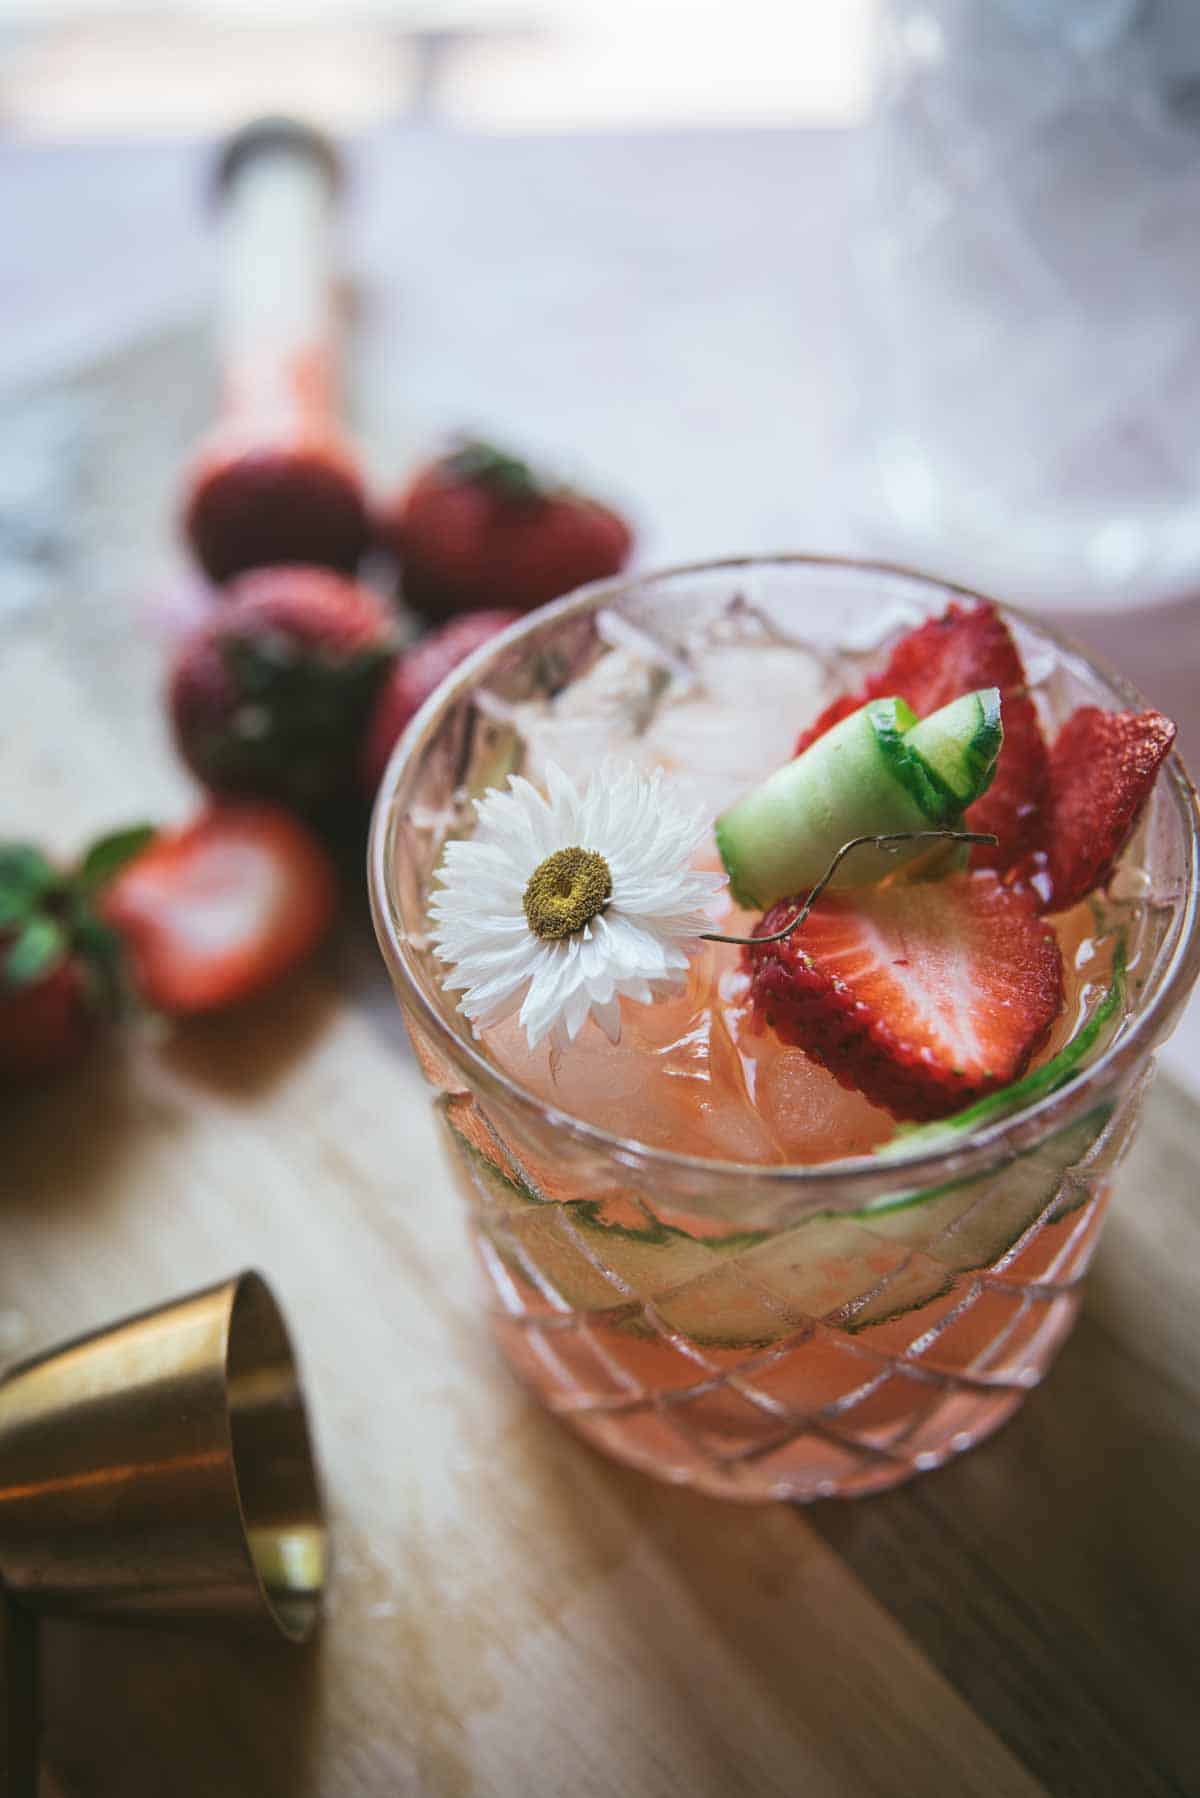 Close up image of completed cocktail. Pink cocktail in decorative rocks glass. A cucumber peel is wrapped around the inside of the glass, it is granished on top with sliced strawberries, cucumber scrolls and a daisy. There are additional chopped strawberries in the background and a brass measuring cup.